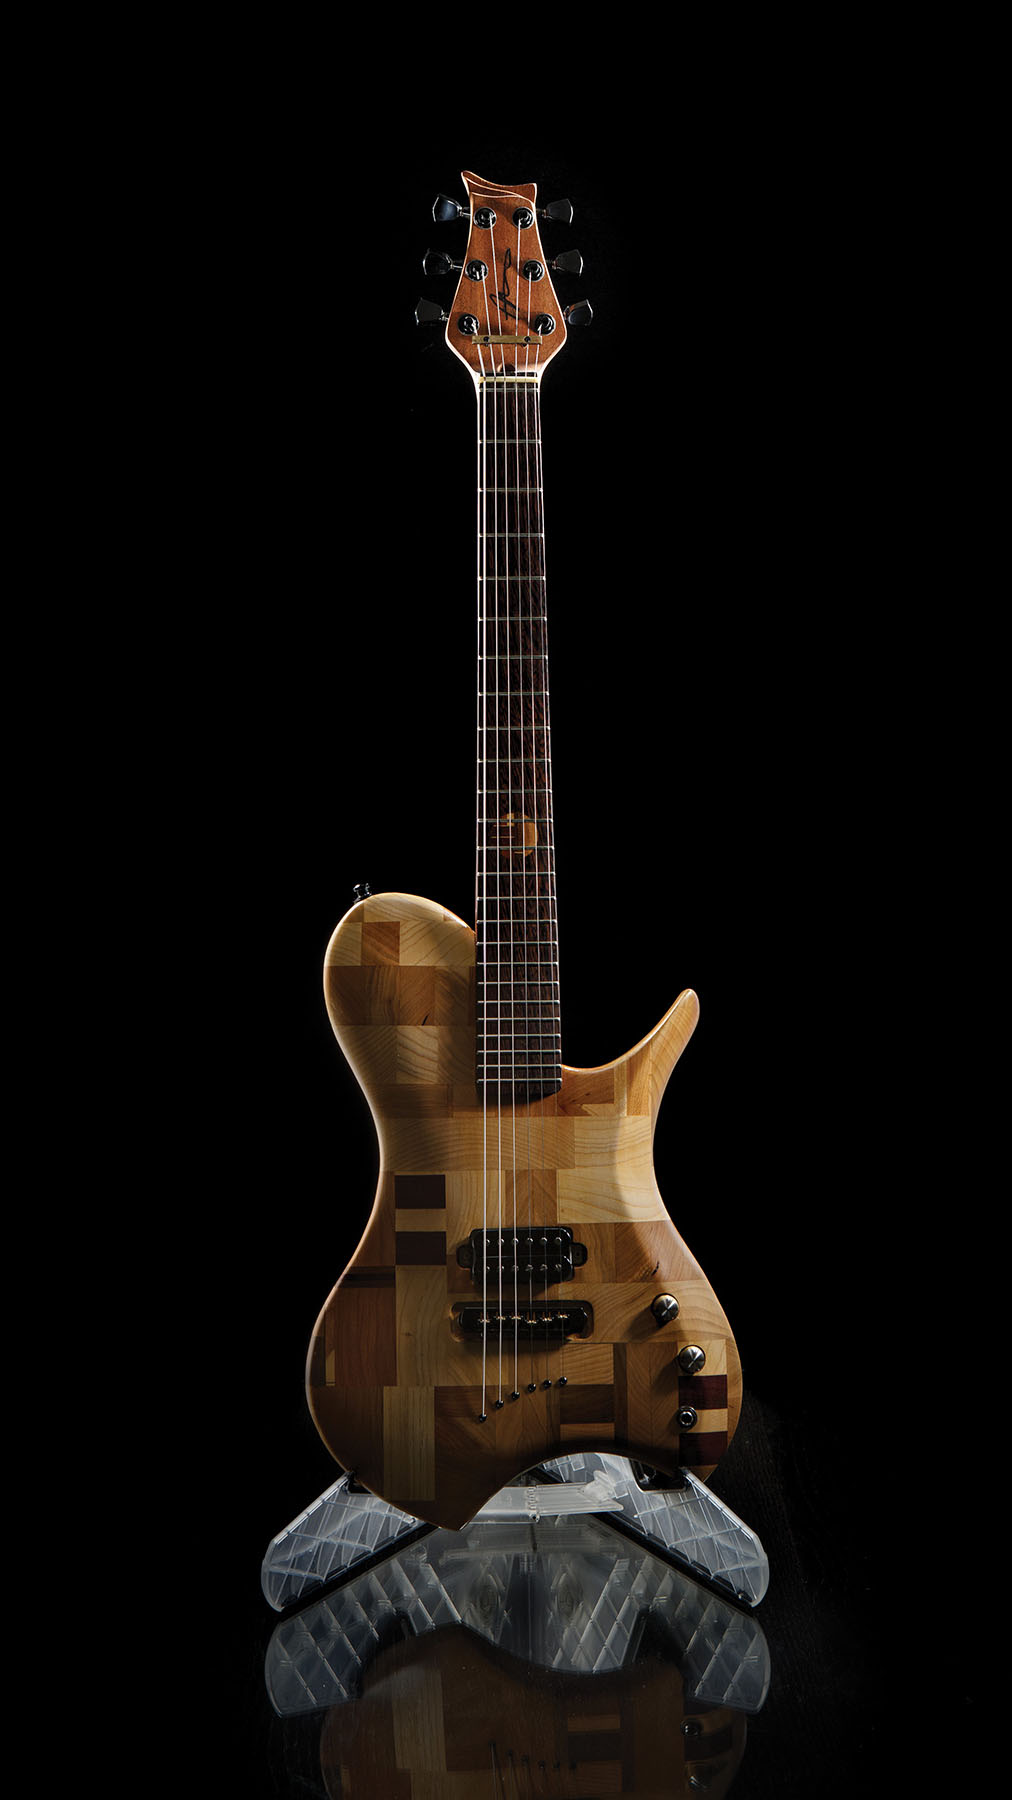 A guitar with butcher block style wood design on a black background